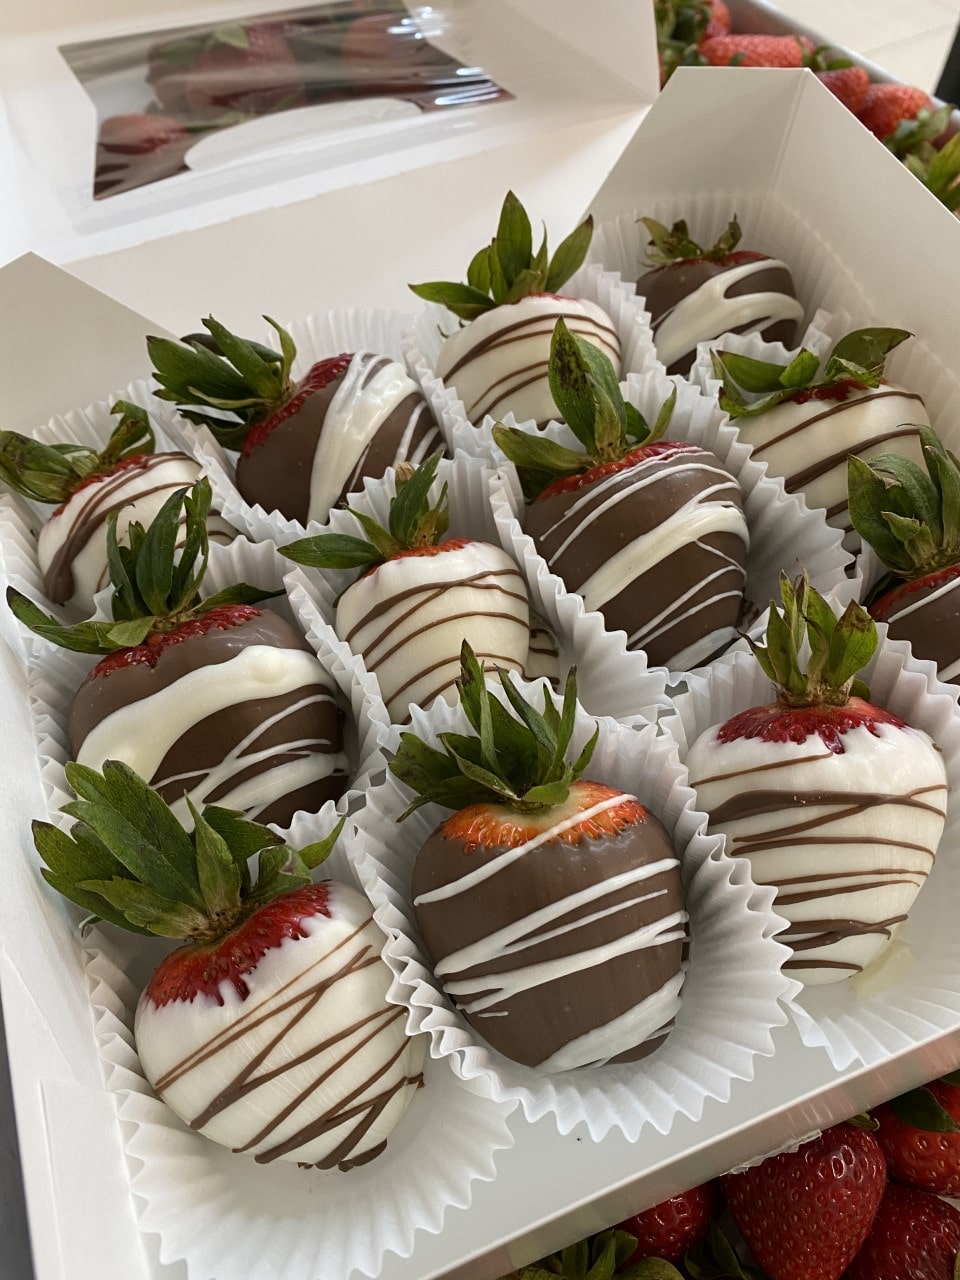 We've got you covered... Order chocolate covered strawberries, pretzels, hot chocolate bombs, cookies, fruit & gift baskets, cherry pies & more!